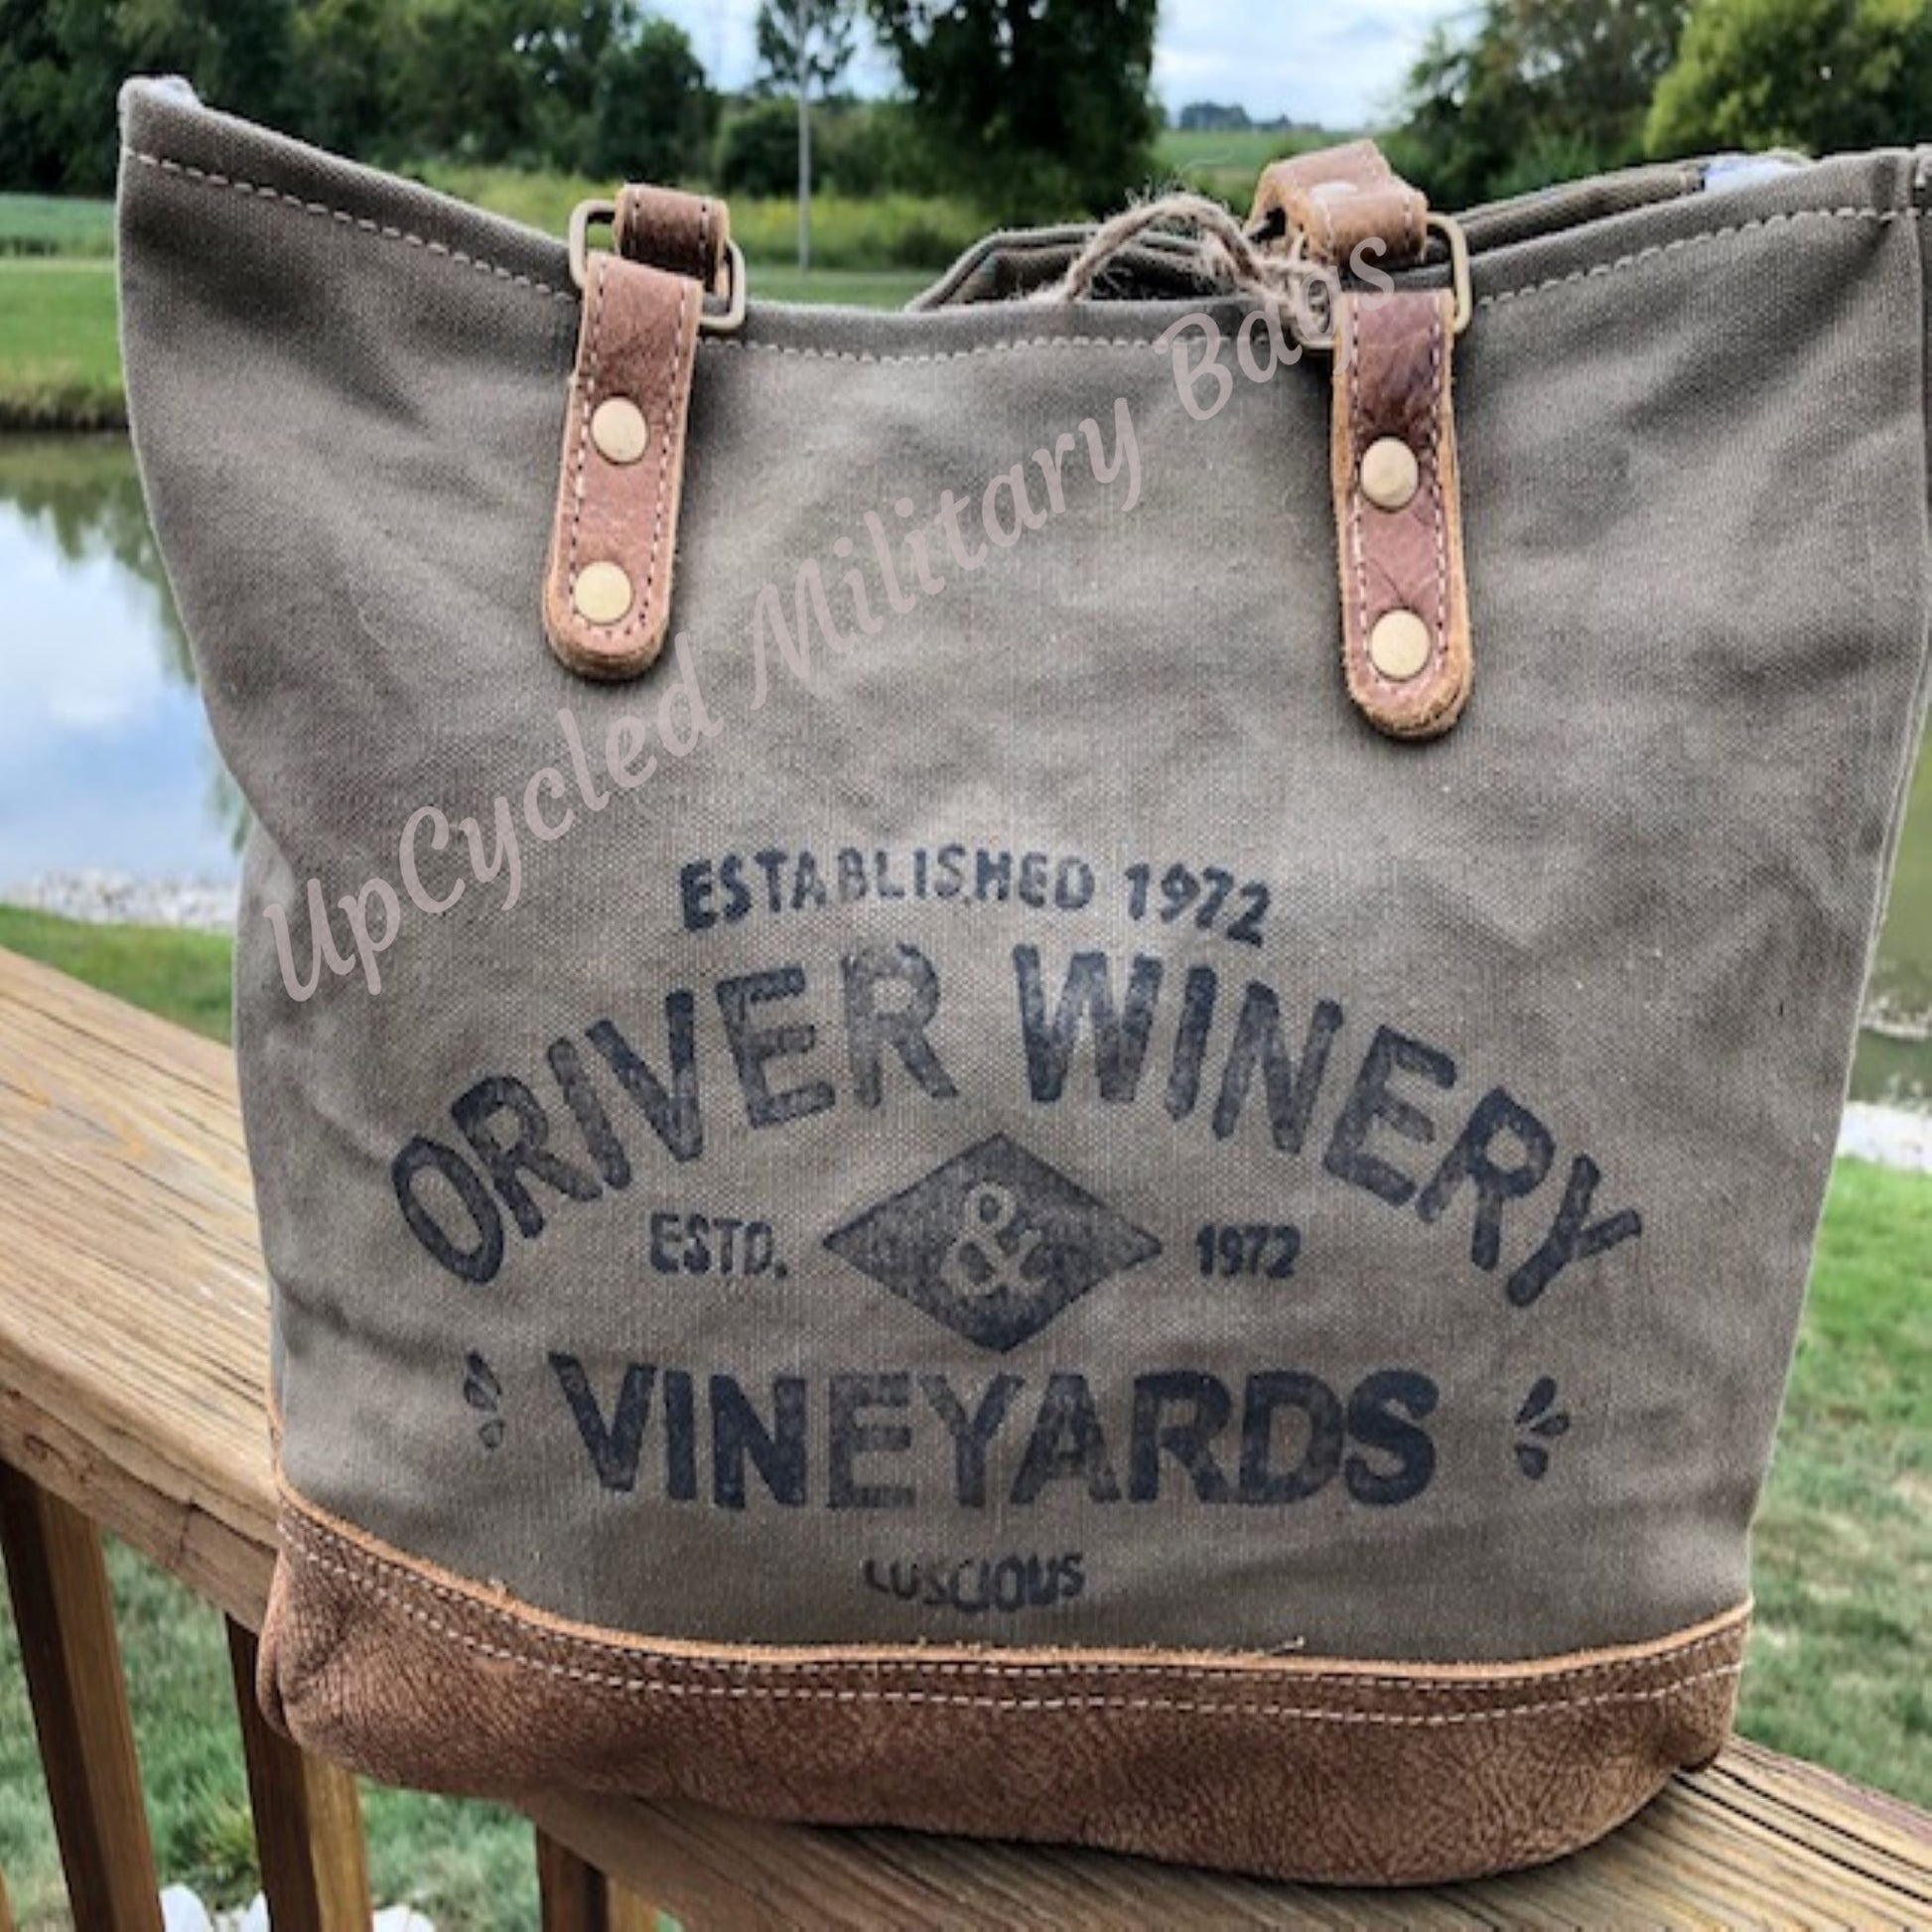 This UpCycled Oriver Winery Bag is constructed of repurposed military tent and tarp canvas. Bag Says : Oriver Winery, established 1972, Vineyards (in black distressed print). Durable enough to make every day an adventure yet still looks classy. Use as a small travel bag, everyday purse, or tote.